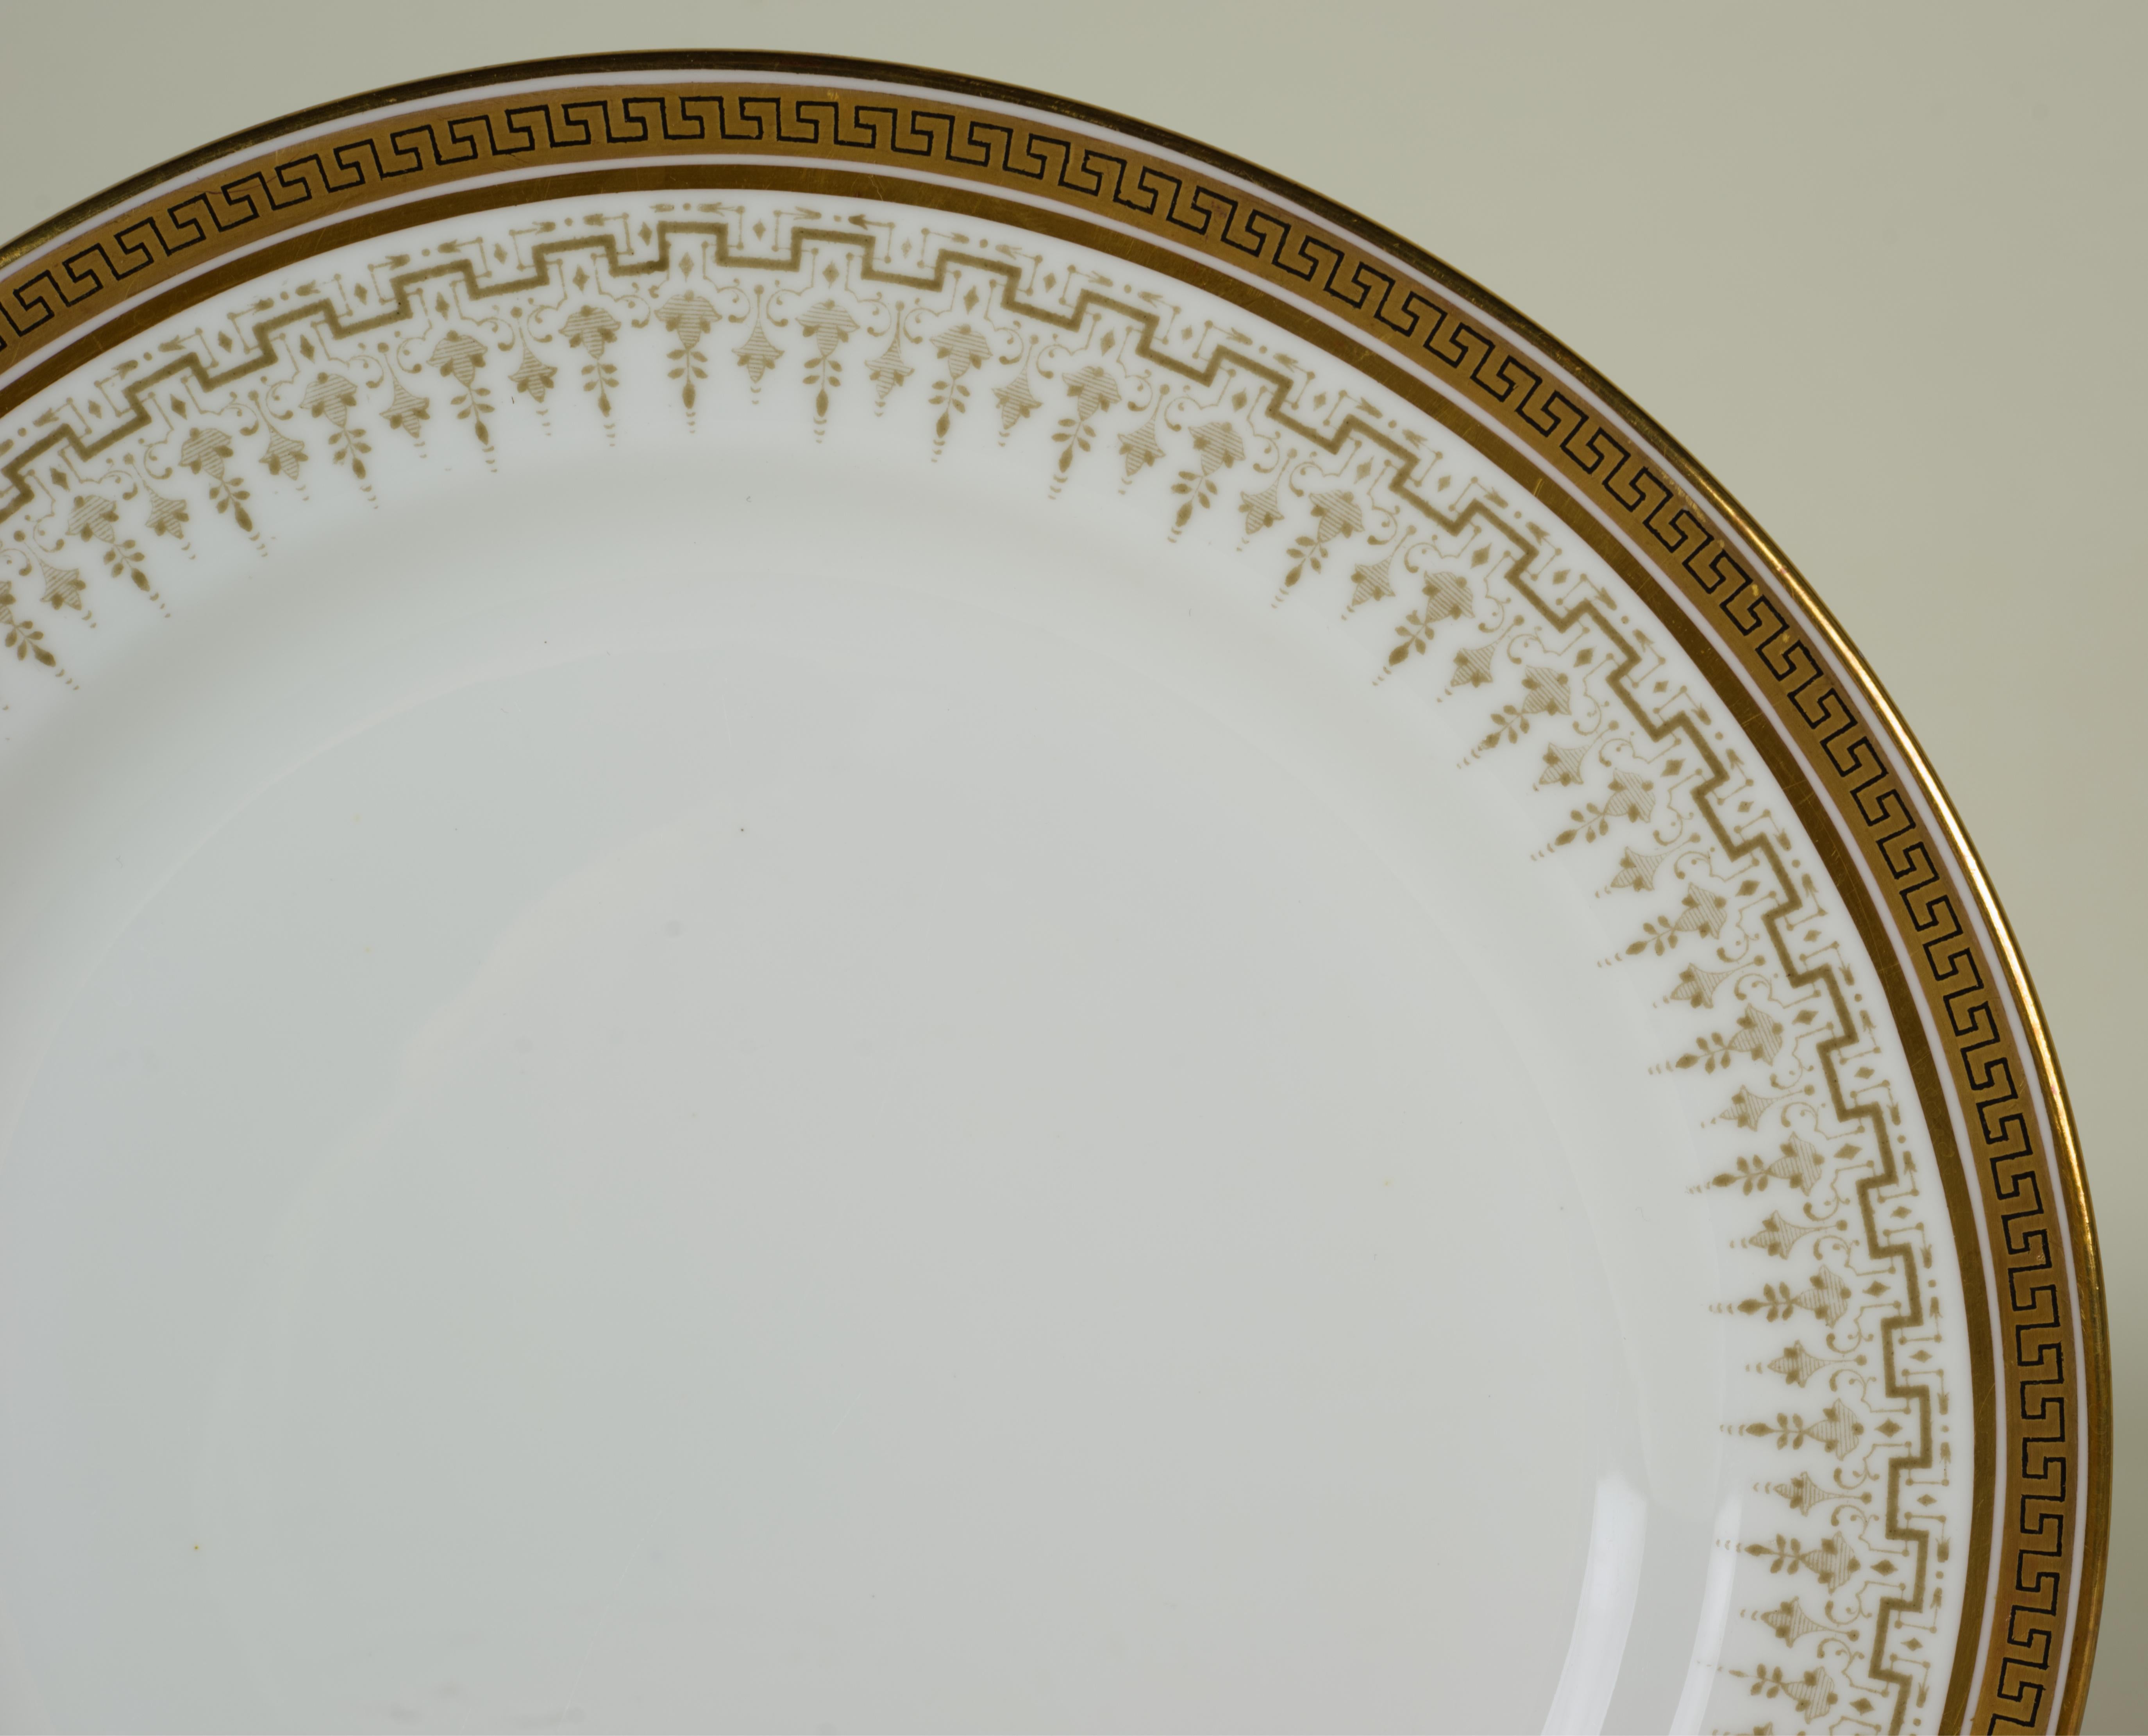 20th Century Cauldon set of 6 luncheon plates in H8413 pattern, 1904-1915 For Sale